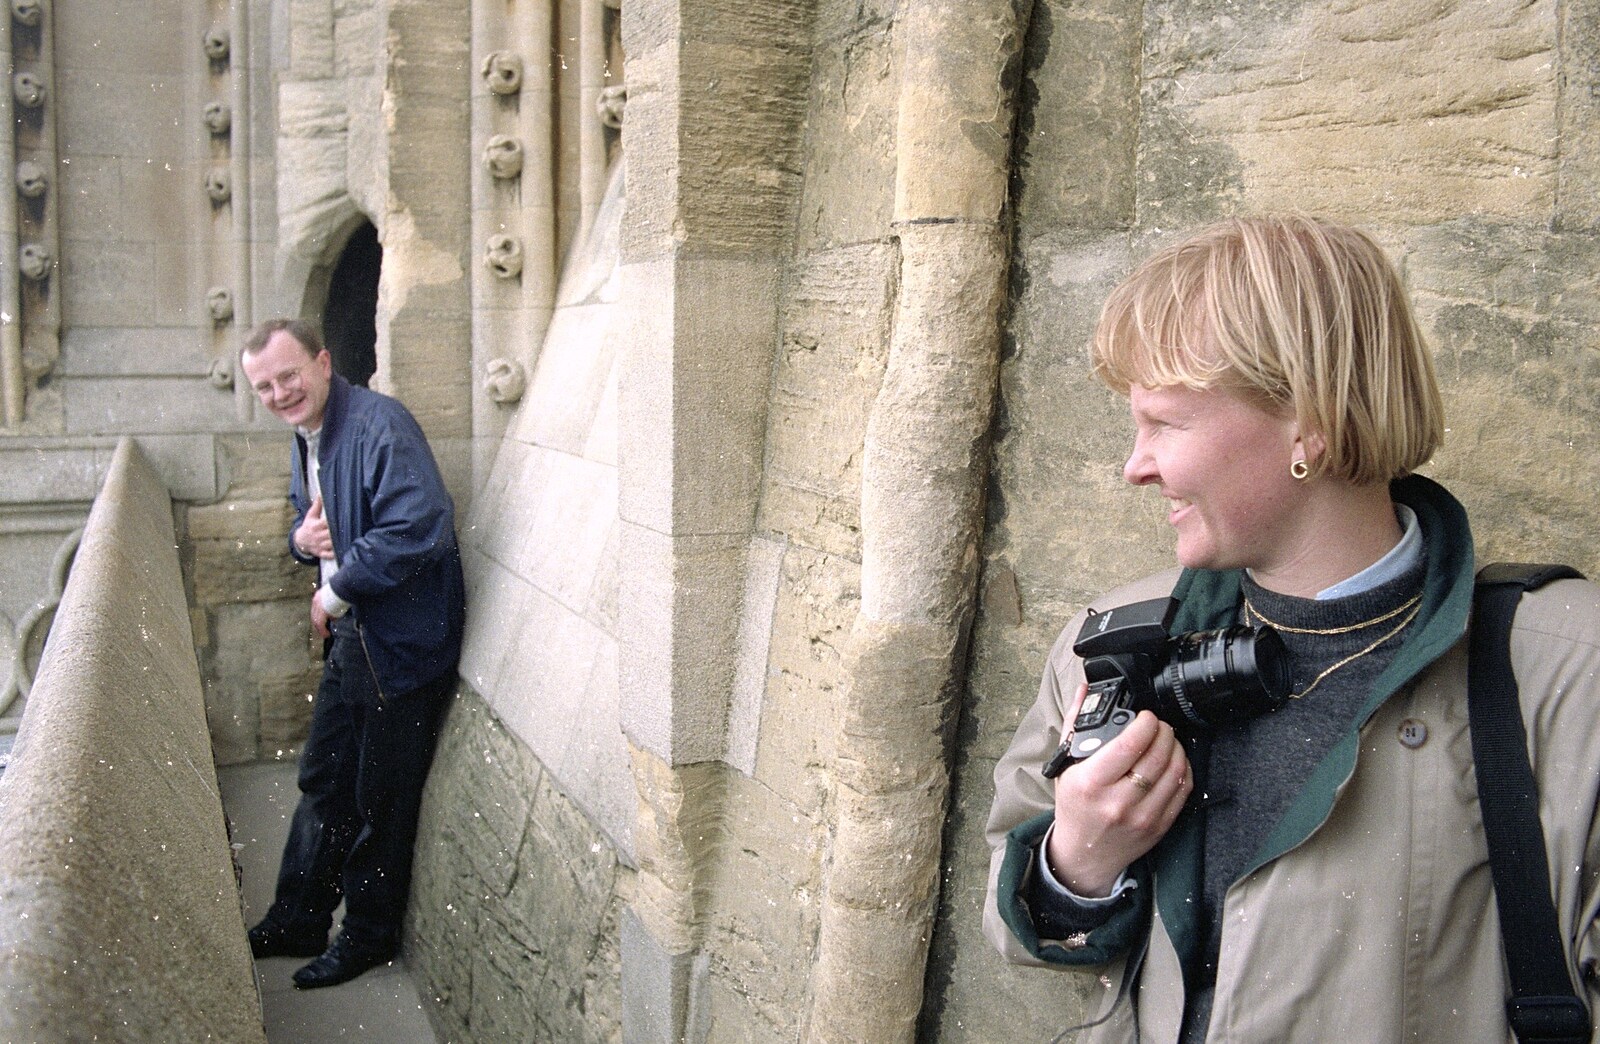 Hamish's Oxford Party, Oxfordshire - 25th April 1992: Up on a church tower